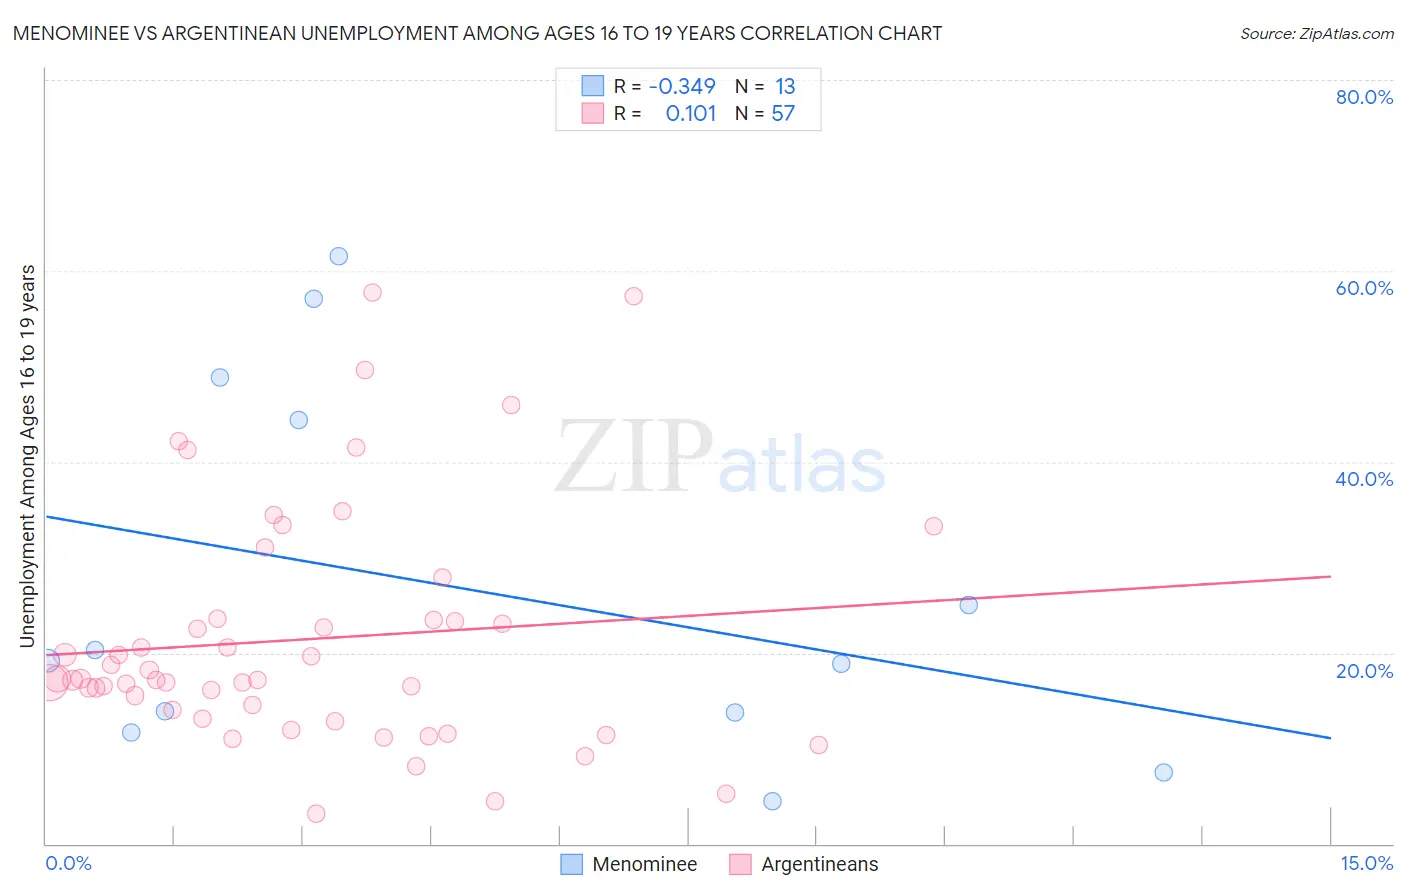 Menominee vs Argentinean Unemployment Among Ages 16 to 19 years